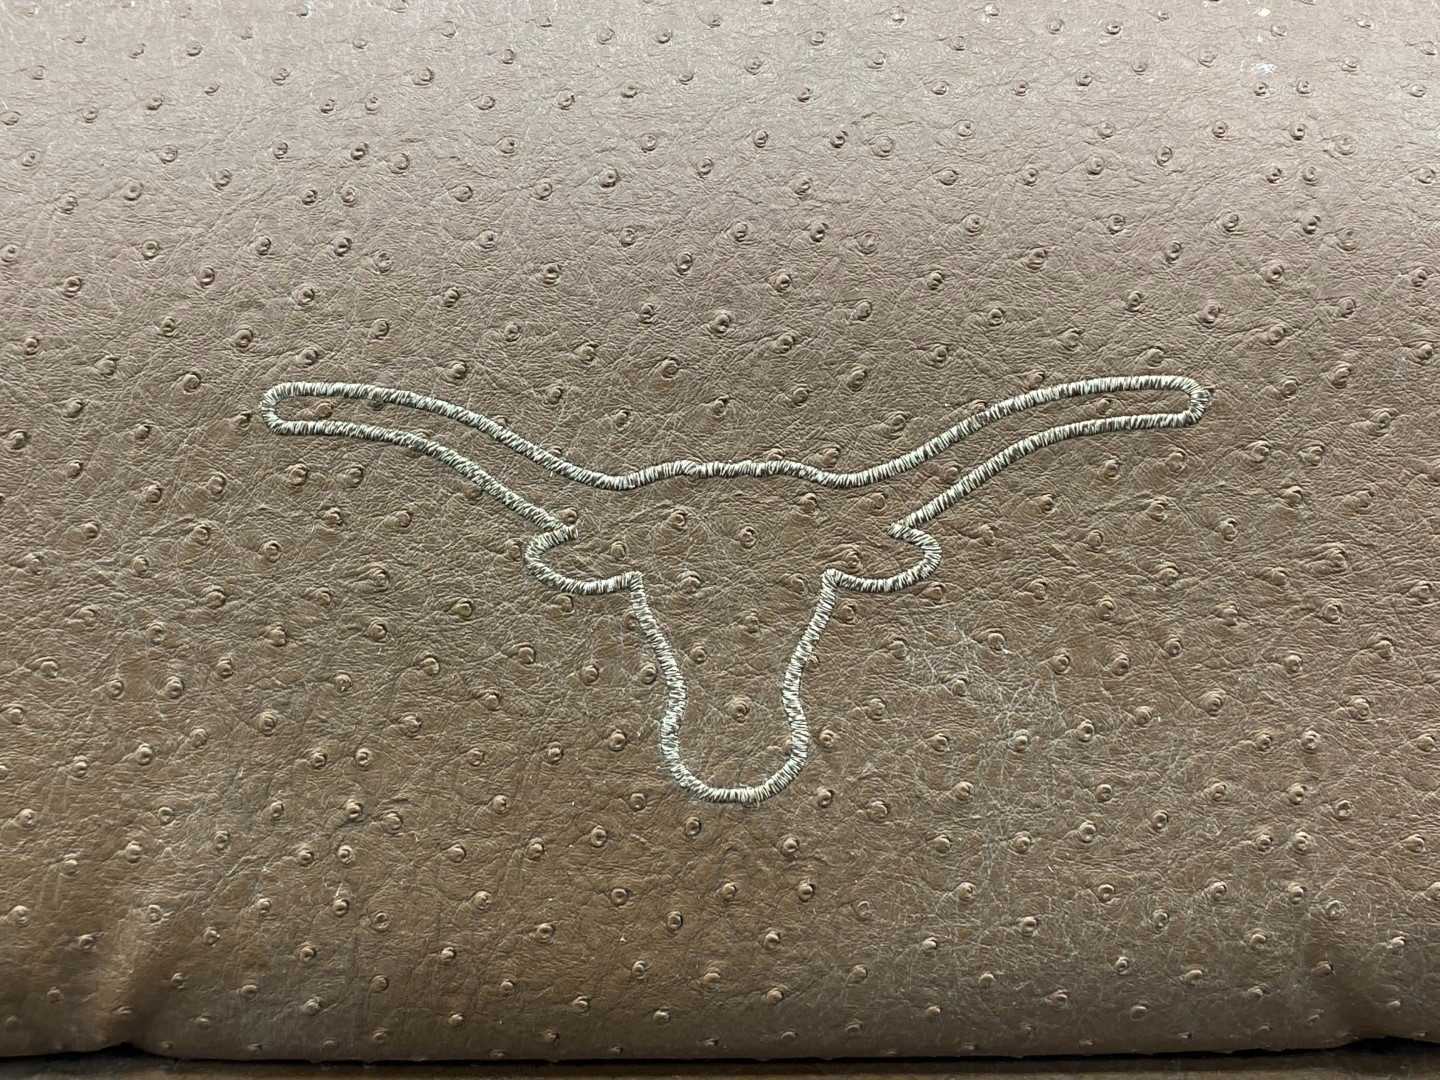 (3) UT Collectors Seats Ostrich Leather Needs some assembly / Frame